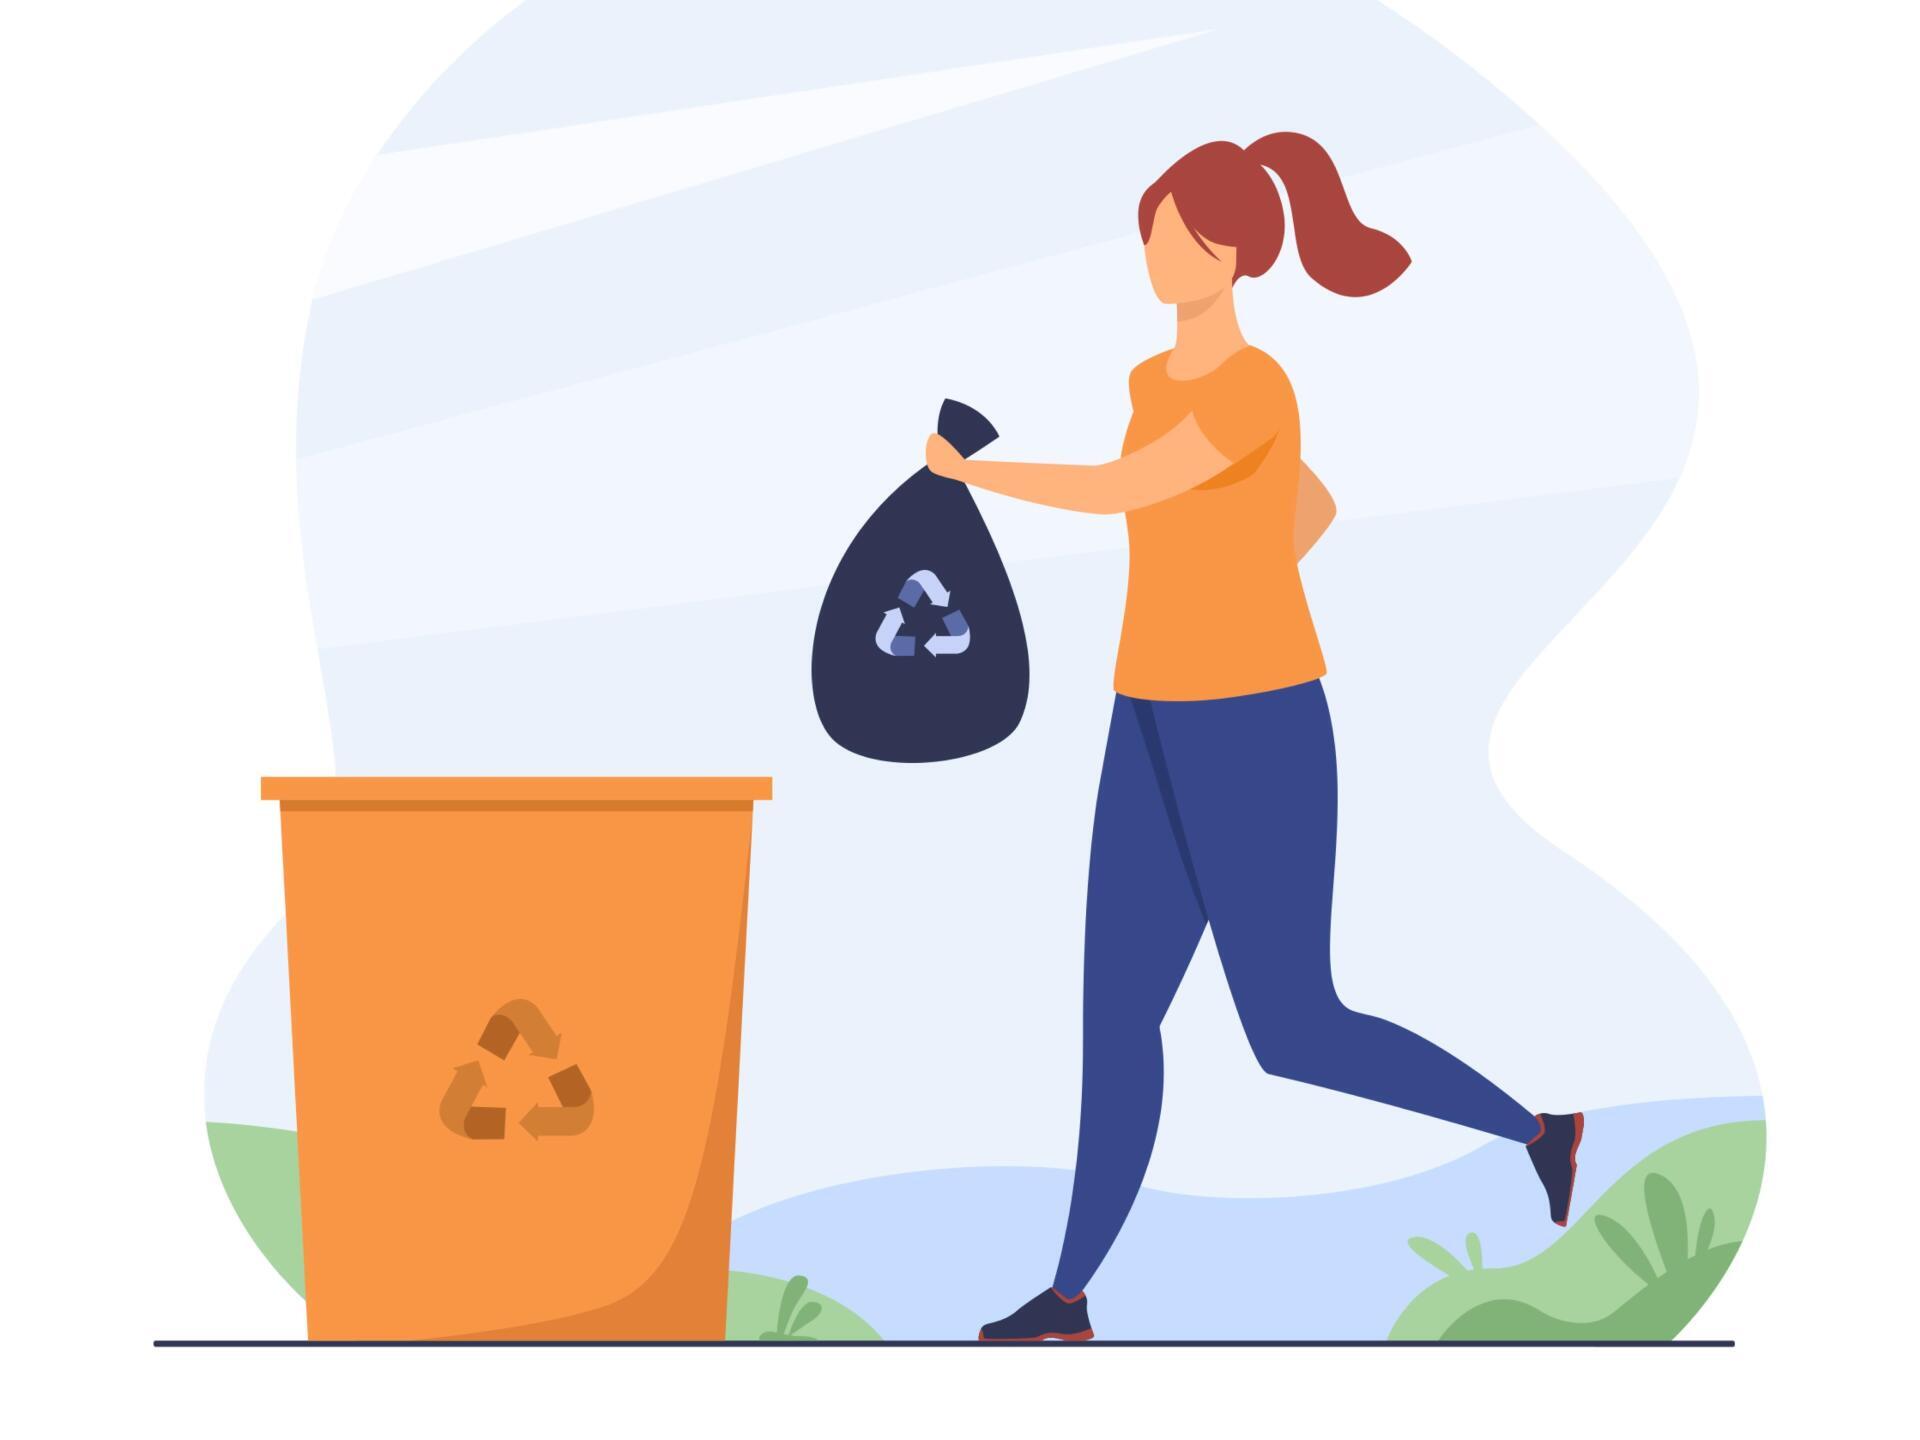 Illustration of a person throwing litter 